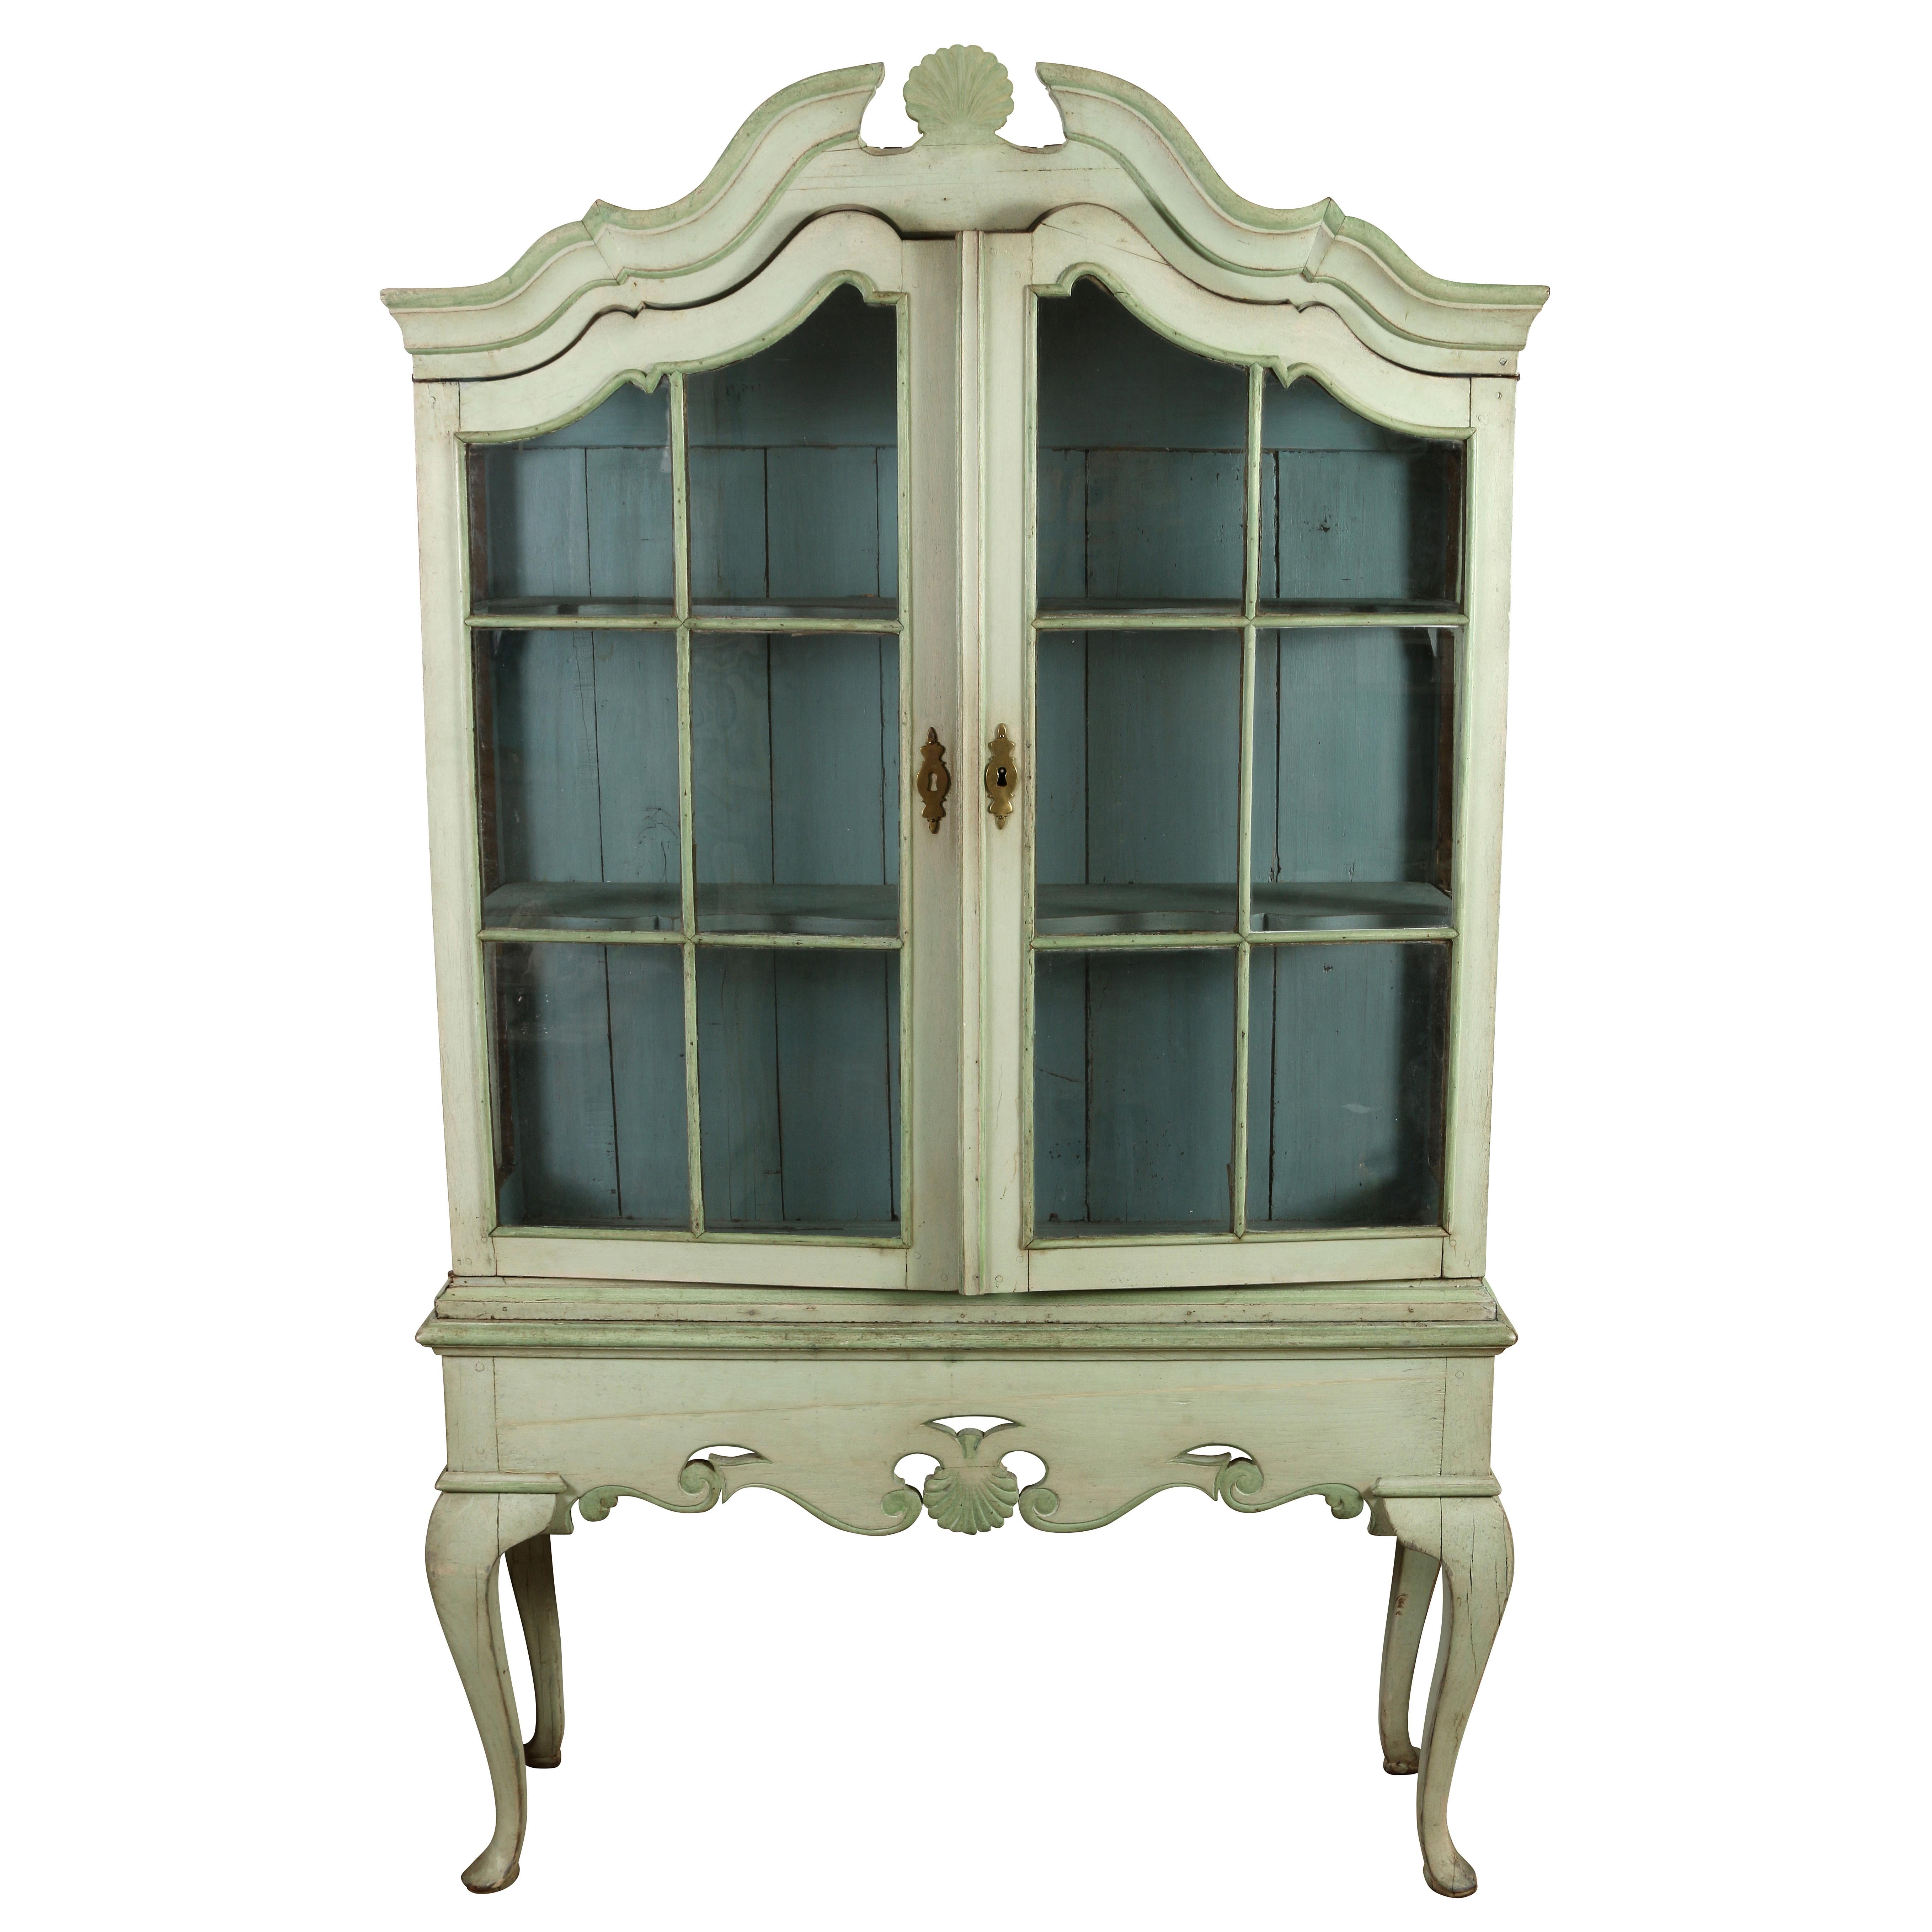 We love the charm and whimsy of this special vitrine cabinet.  Painted in a light green with a deep blue interior, the top  portion has glazed doors with the original glass,  The broken pediment and the apron on lower section are decorated with a